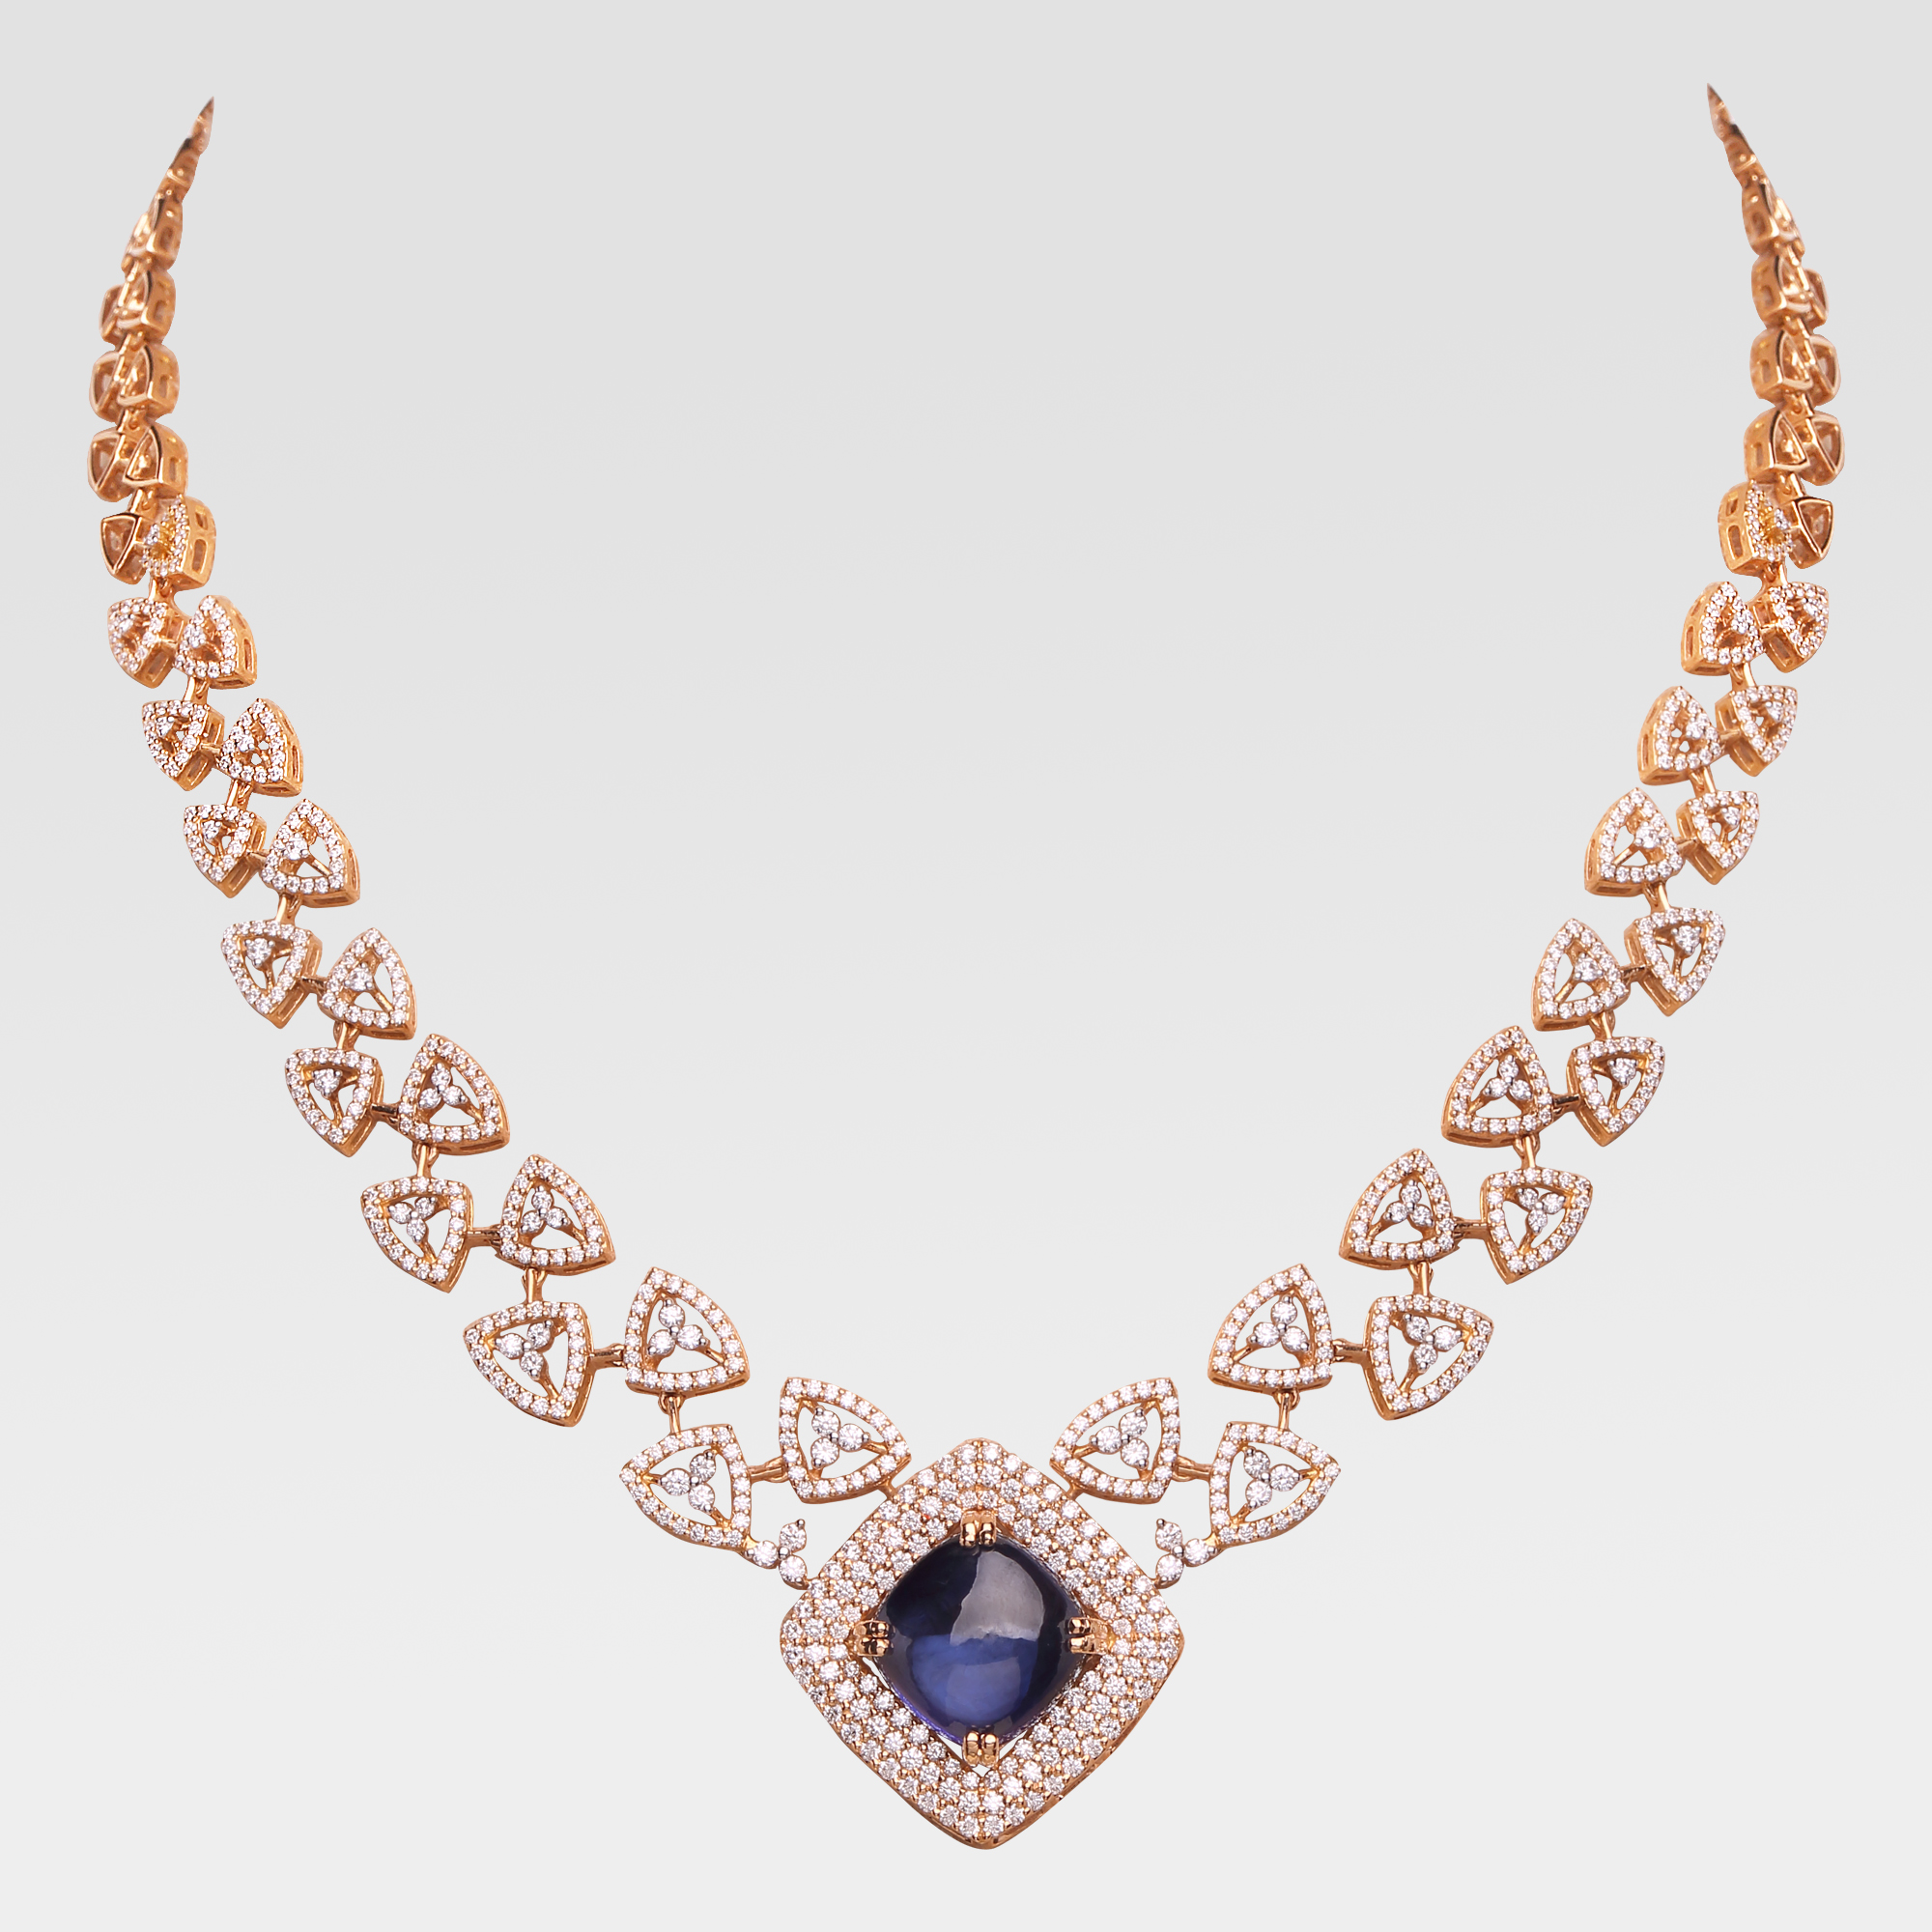 dignified diamond necklace